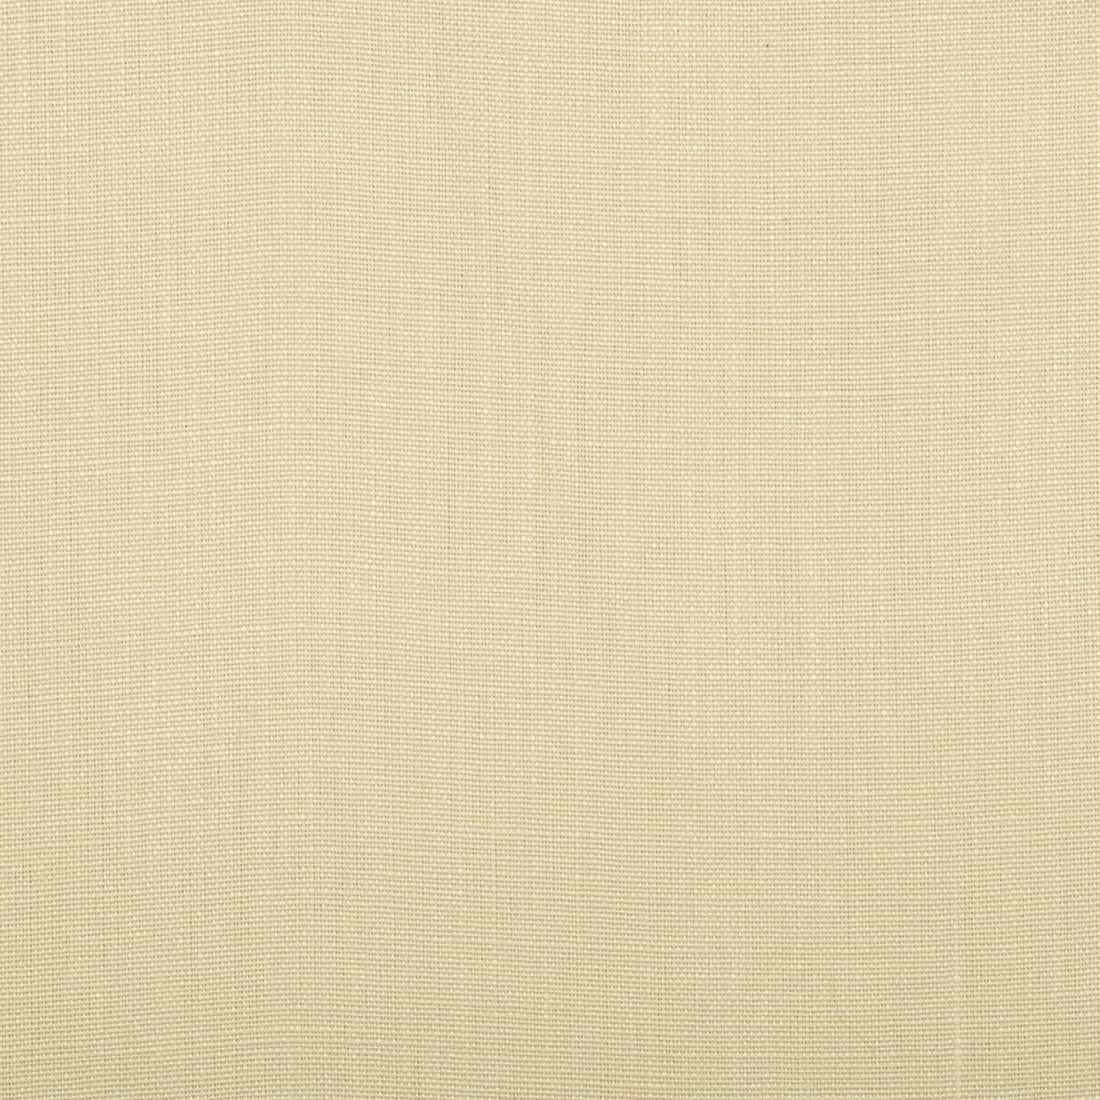 Hampton Linen fabric in tan color - pattern number 2012171.1601.0 - by Lee Jofa in the Colour Compliments II collection.